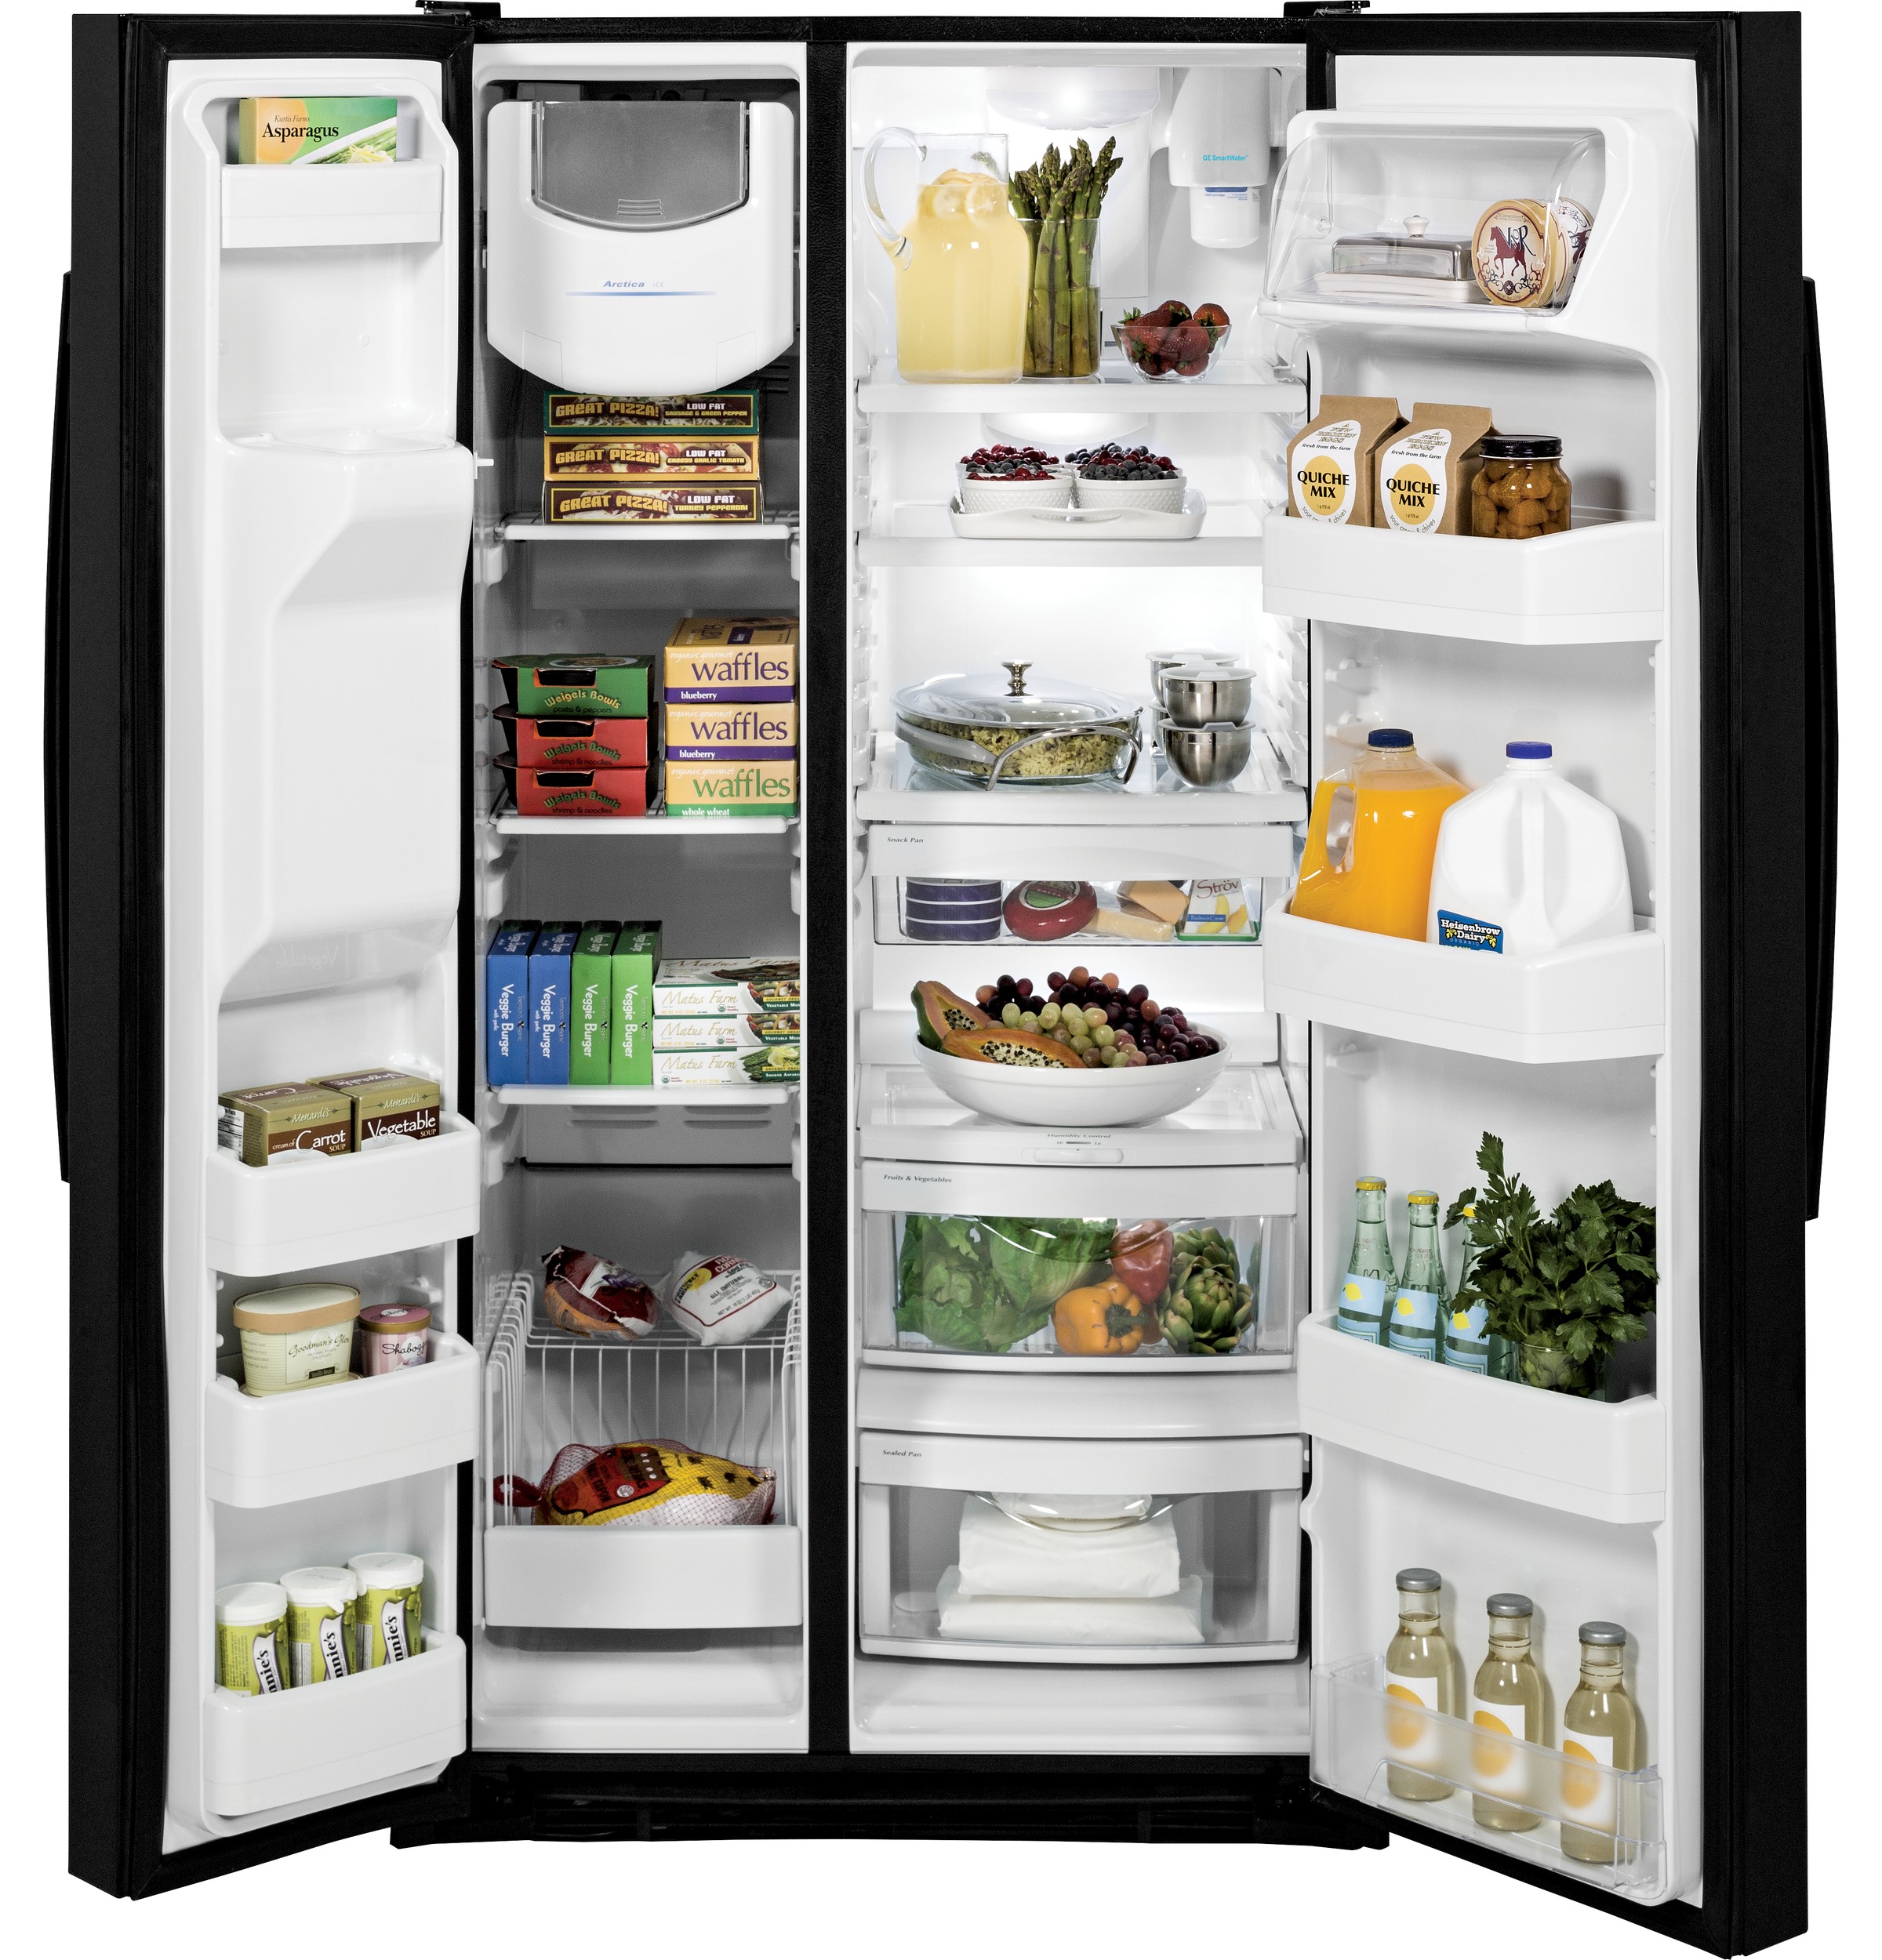 GE 25.3-cu ft Side-by-Side Refrigerator with Ice Maker (Black) at Lowes.com